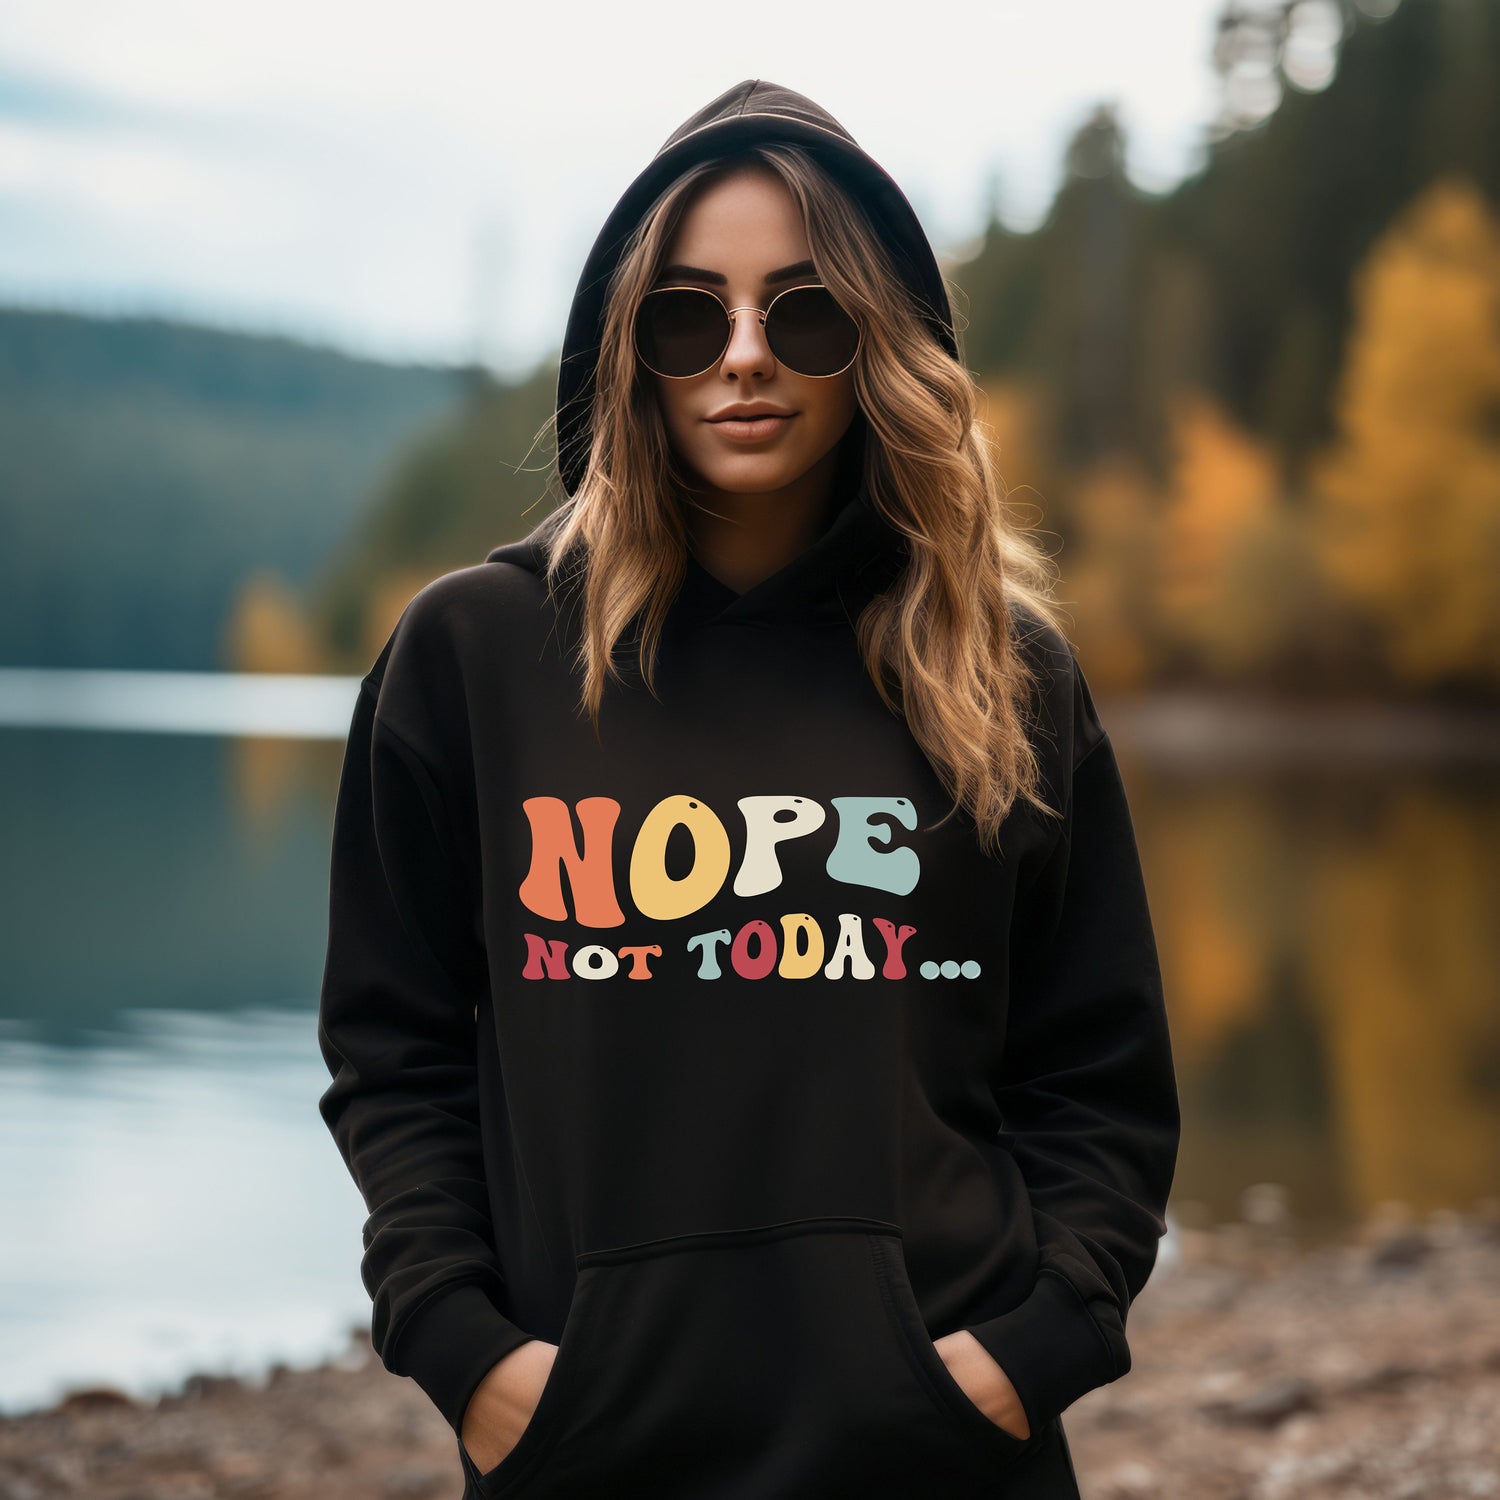 Nope Not Today Hooded Sweatshirt- Sassy Hoodie- Not in the mood- introvert- funny hoodie- unique aesthetic